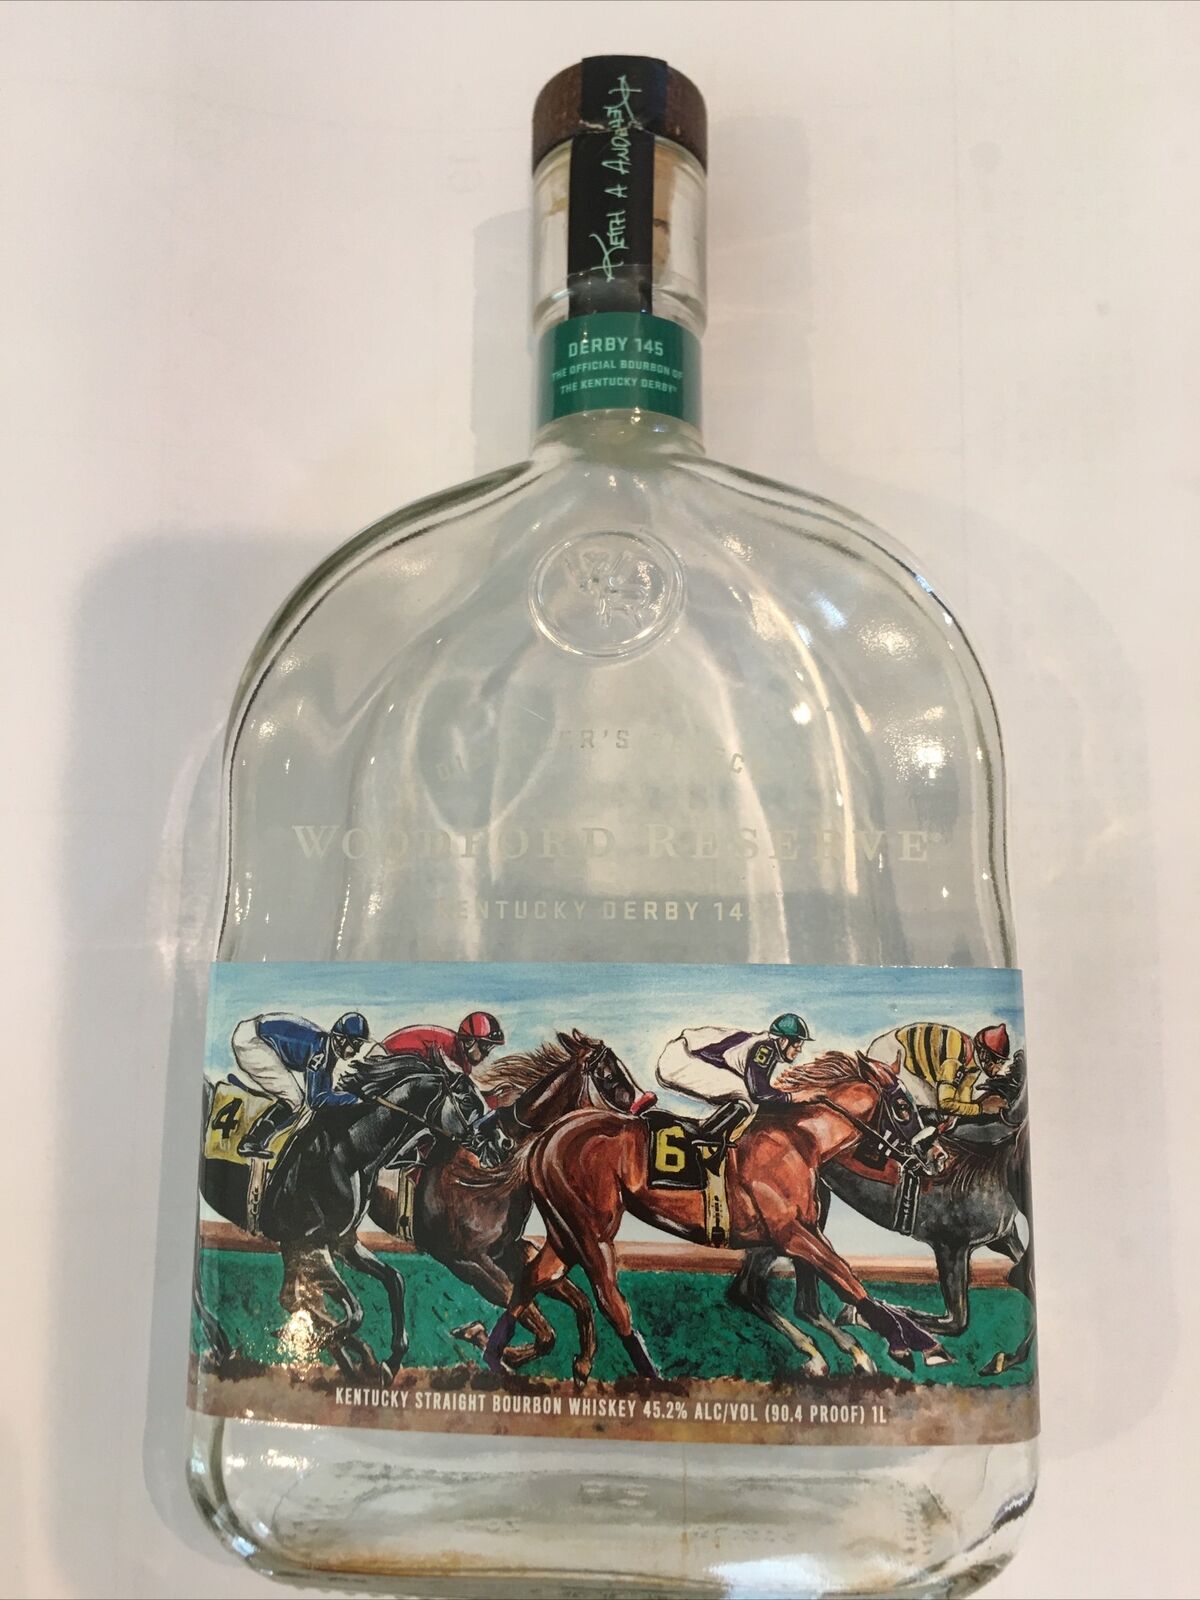 Ltd Ed Woodford Reserve Kentucky Derby 145 with cork from Historical Derby